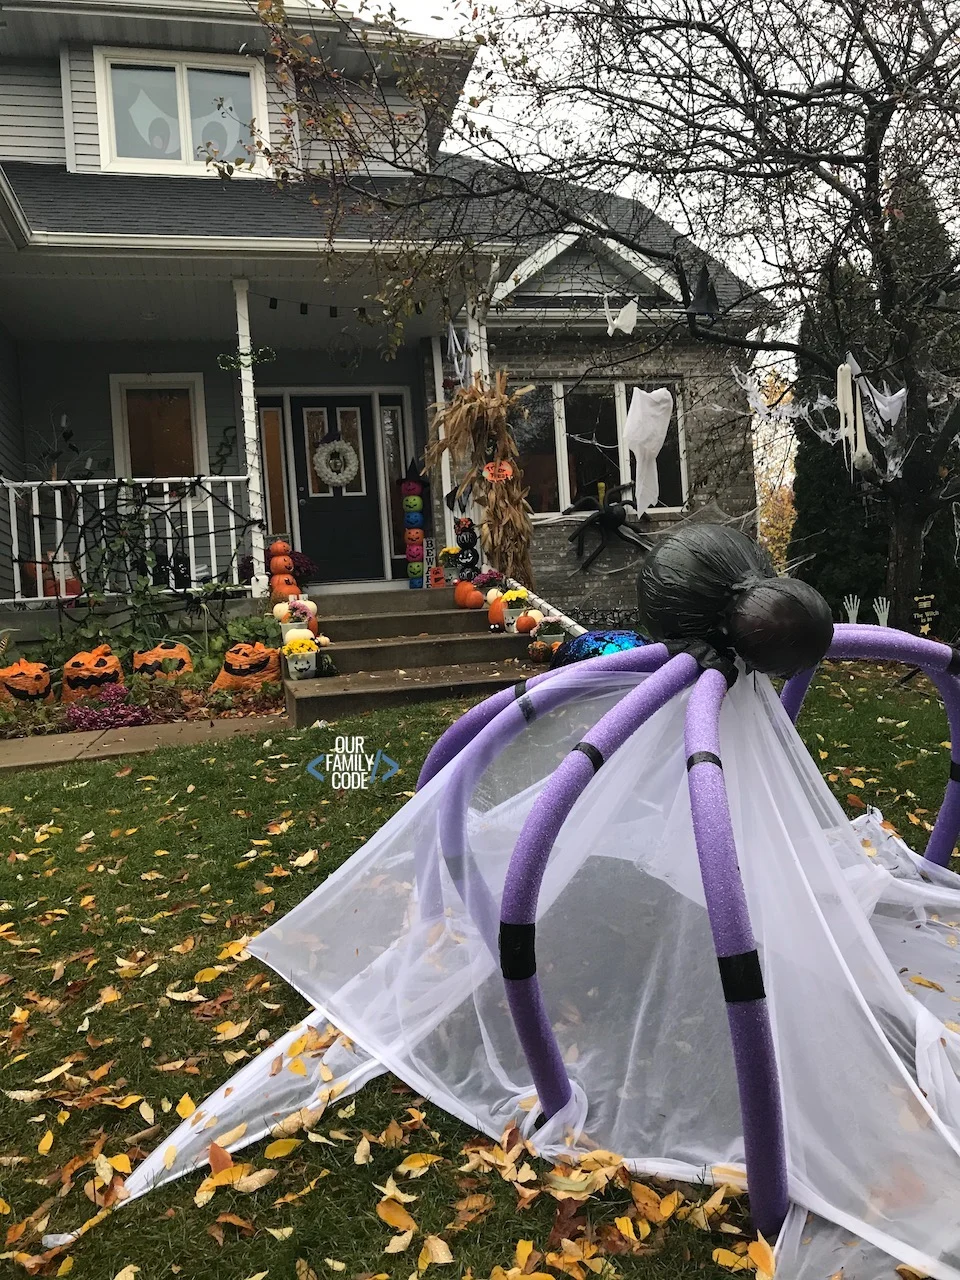 A picture of a house decorated for Halloween with a plastic pumpkin tower decoration, lots of pumpkins, hanging ghosts, and a giant pool noodle spider.